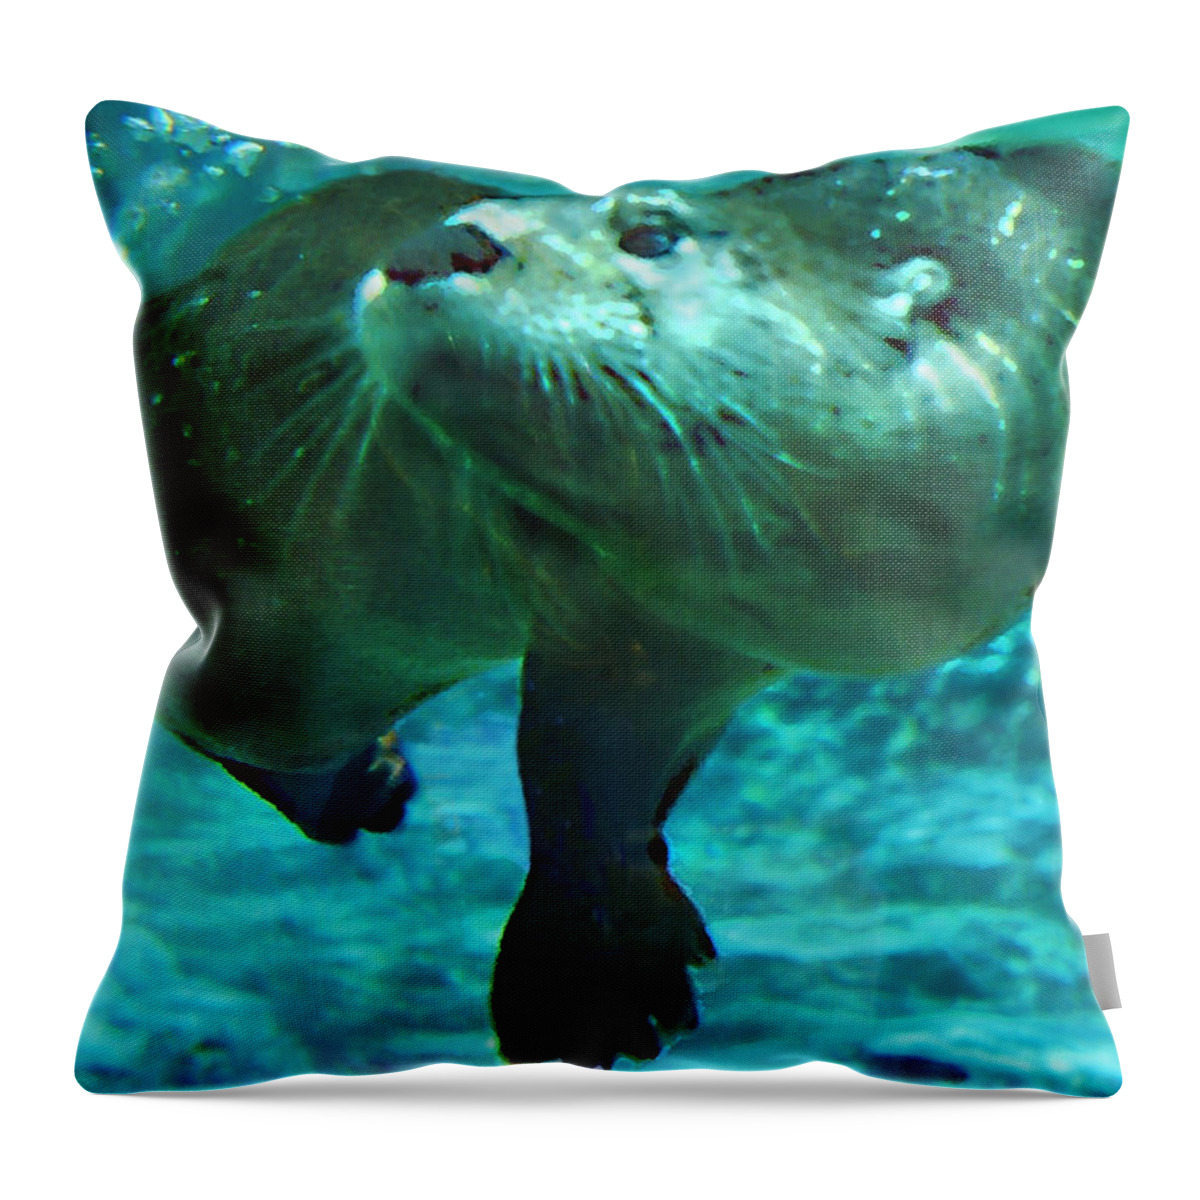 Animal Throw Pillow featuring the photograph River Otter by Steve Karol